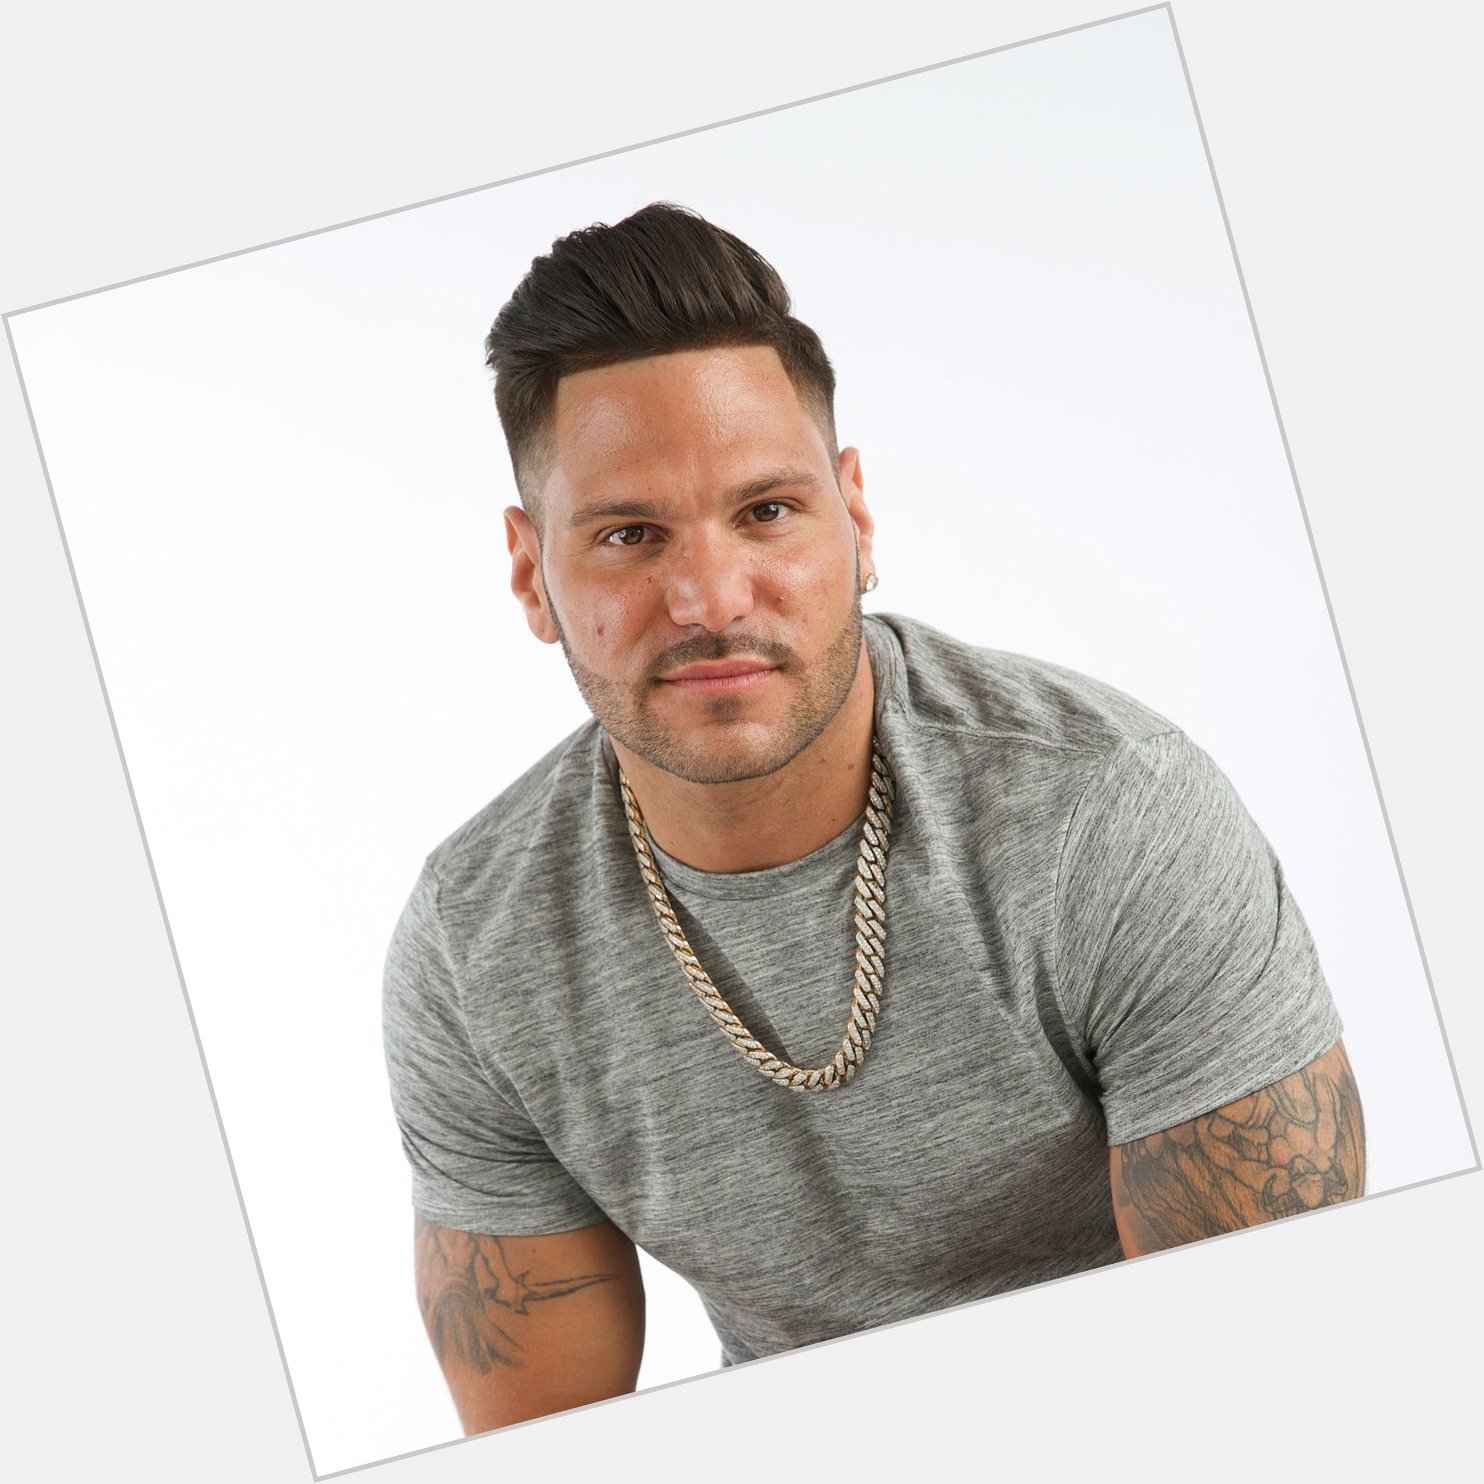 On this day in 1985 Ronnie Ortiz-Magro was born.

Happy Birthday!  